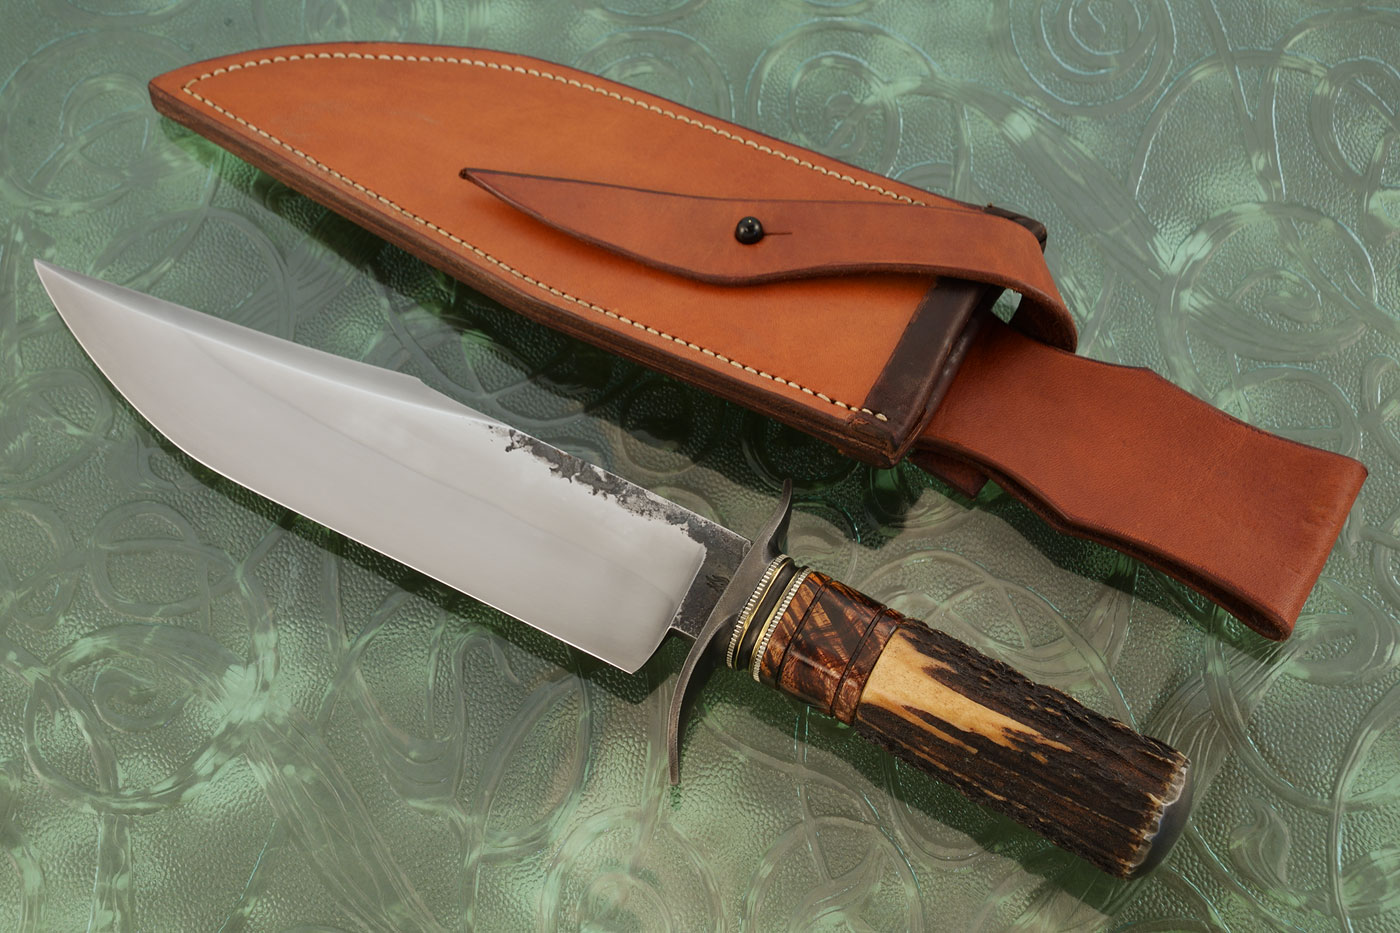 Brute de Forge Bowie with Wrought Iron and Stag